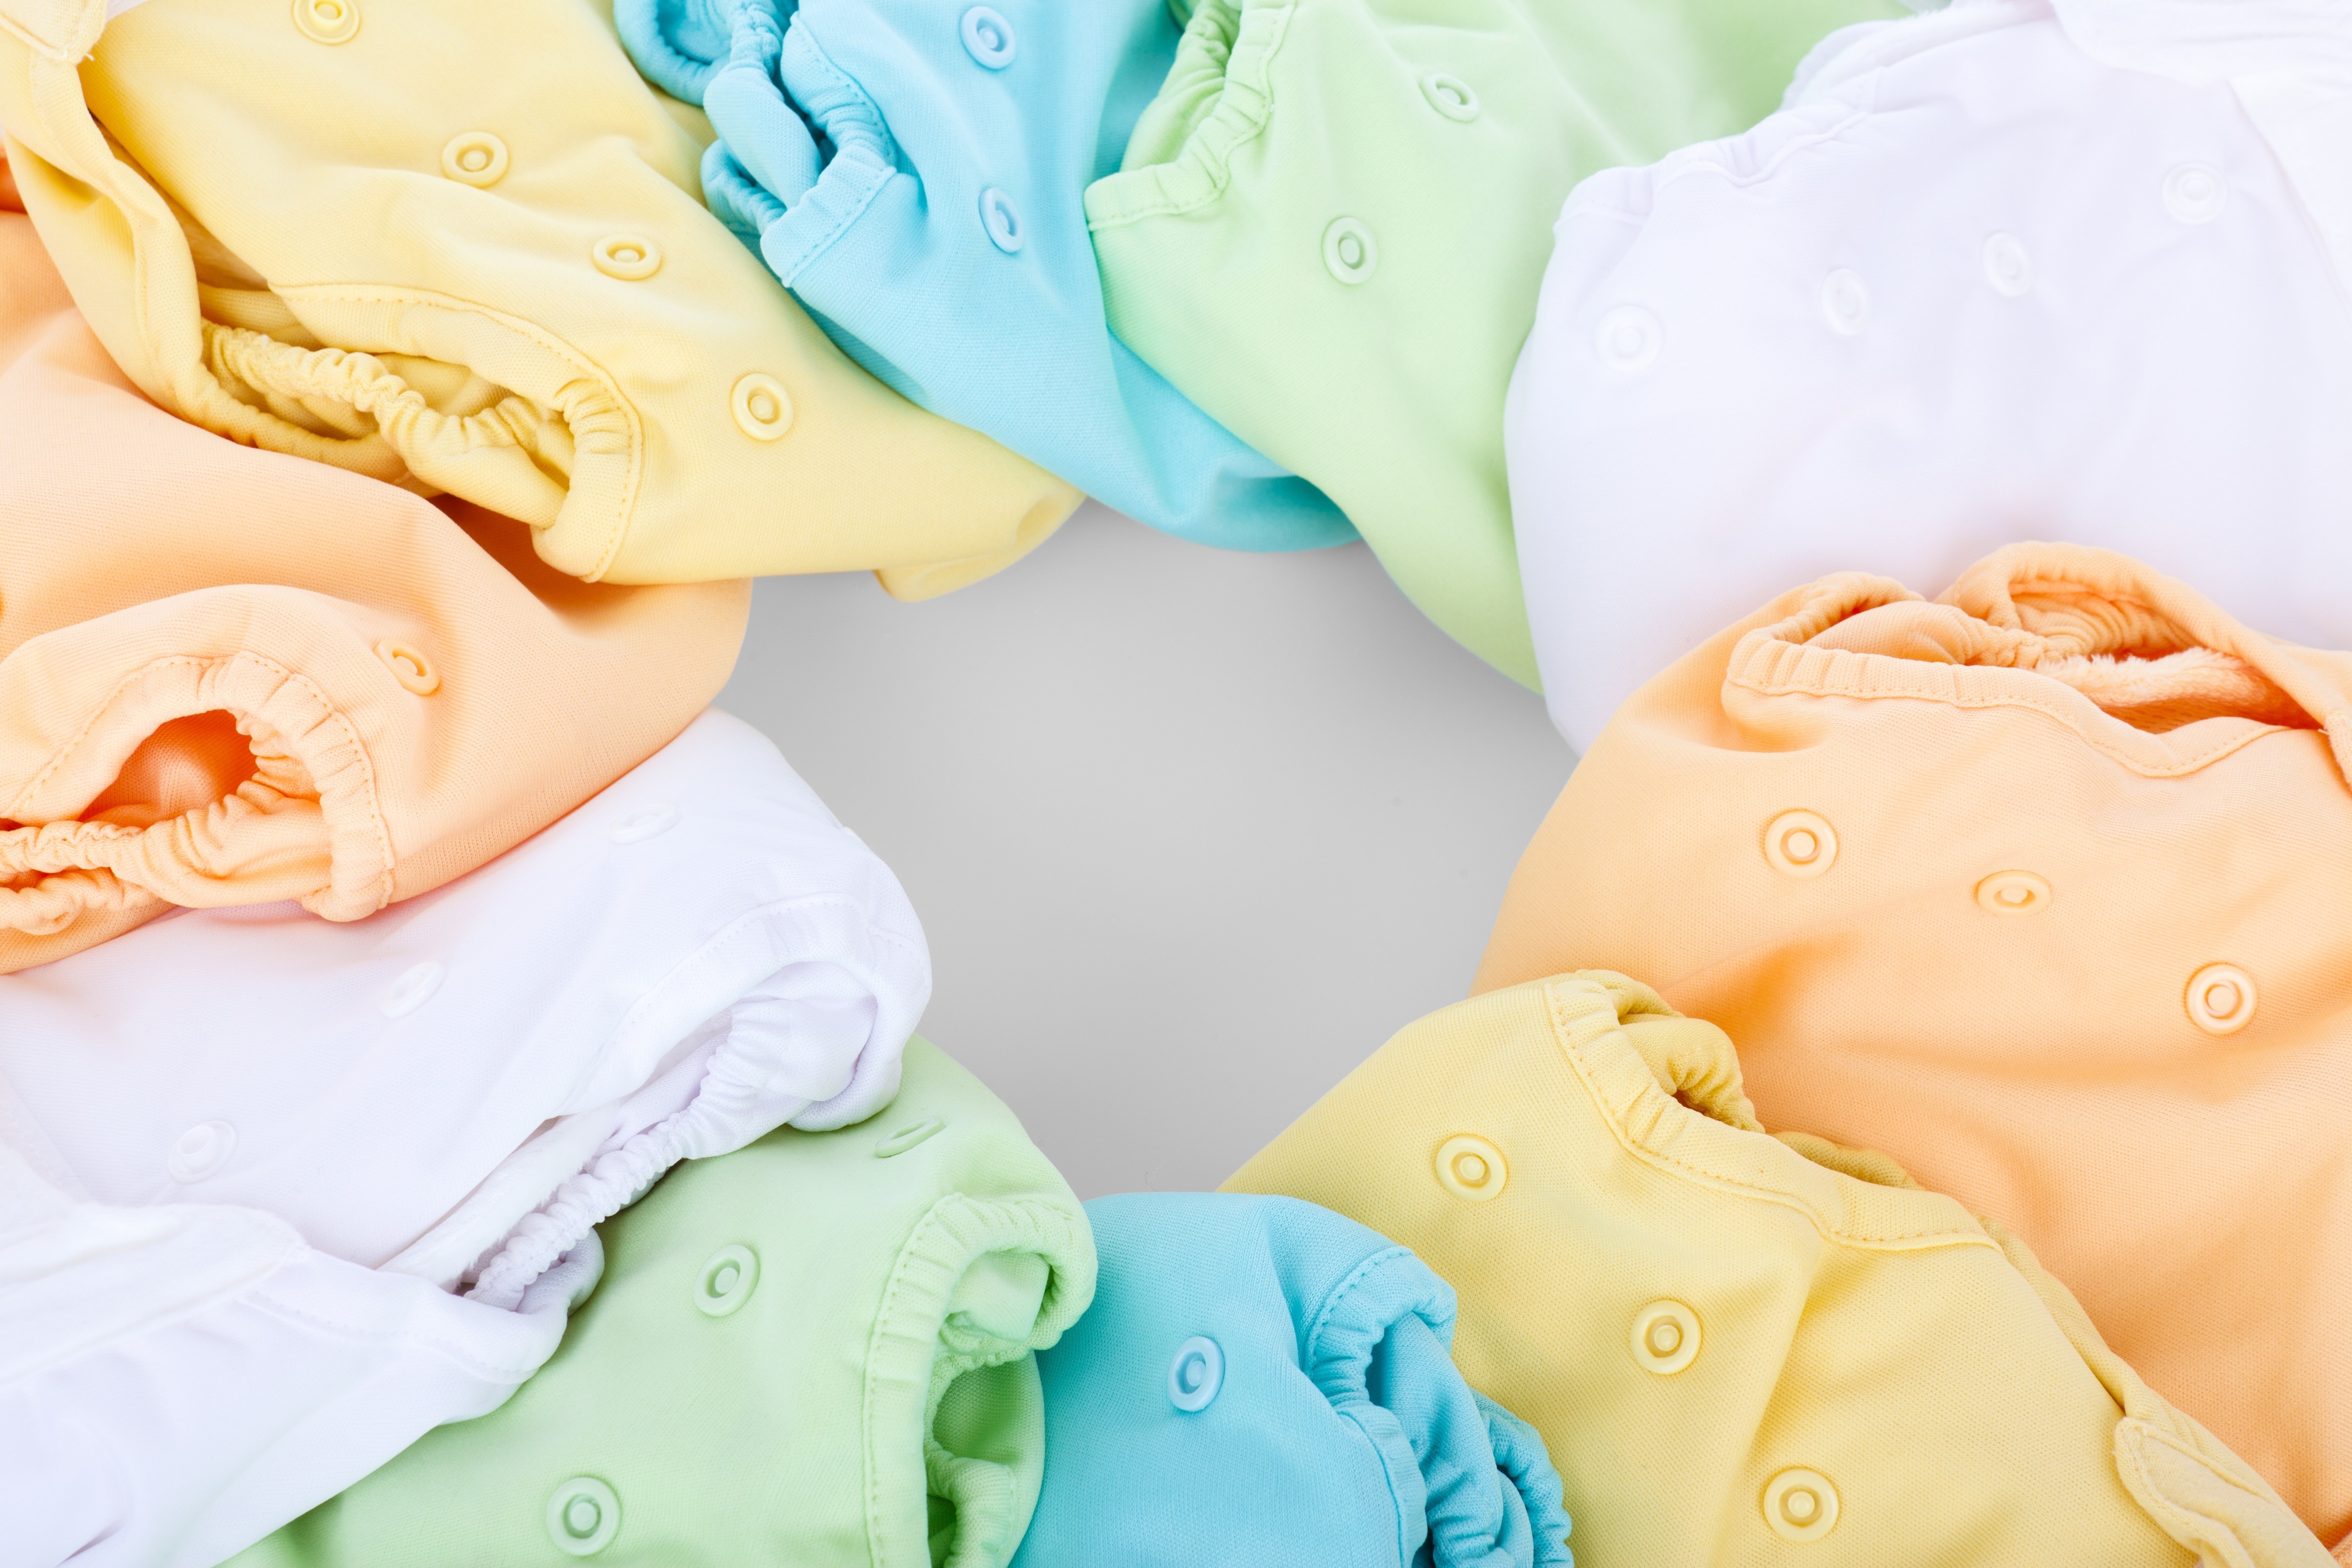 yellow, blue, green, and white cloth diapers